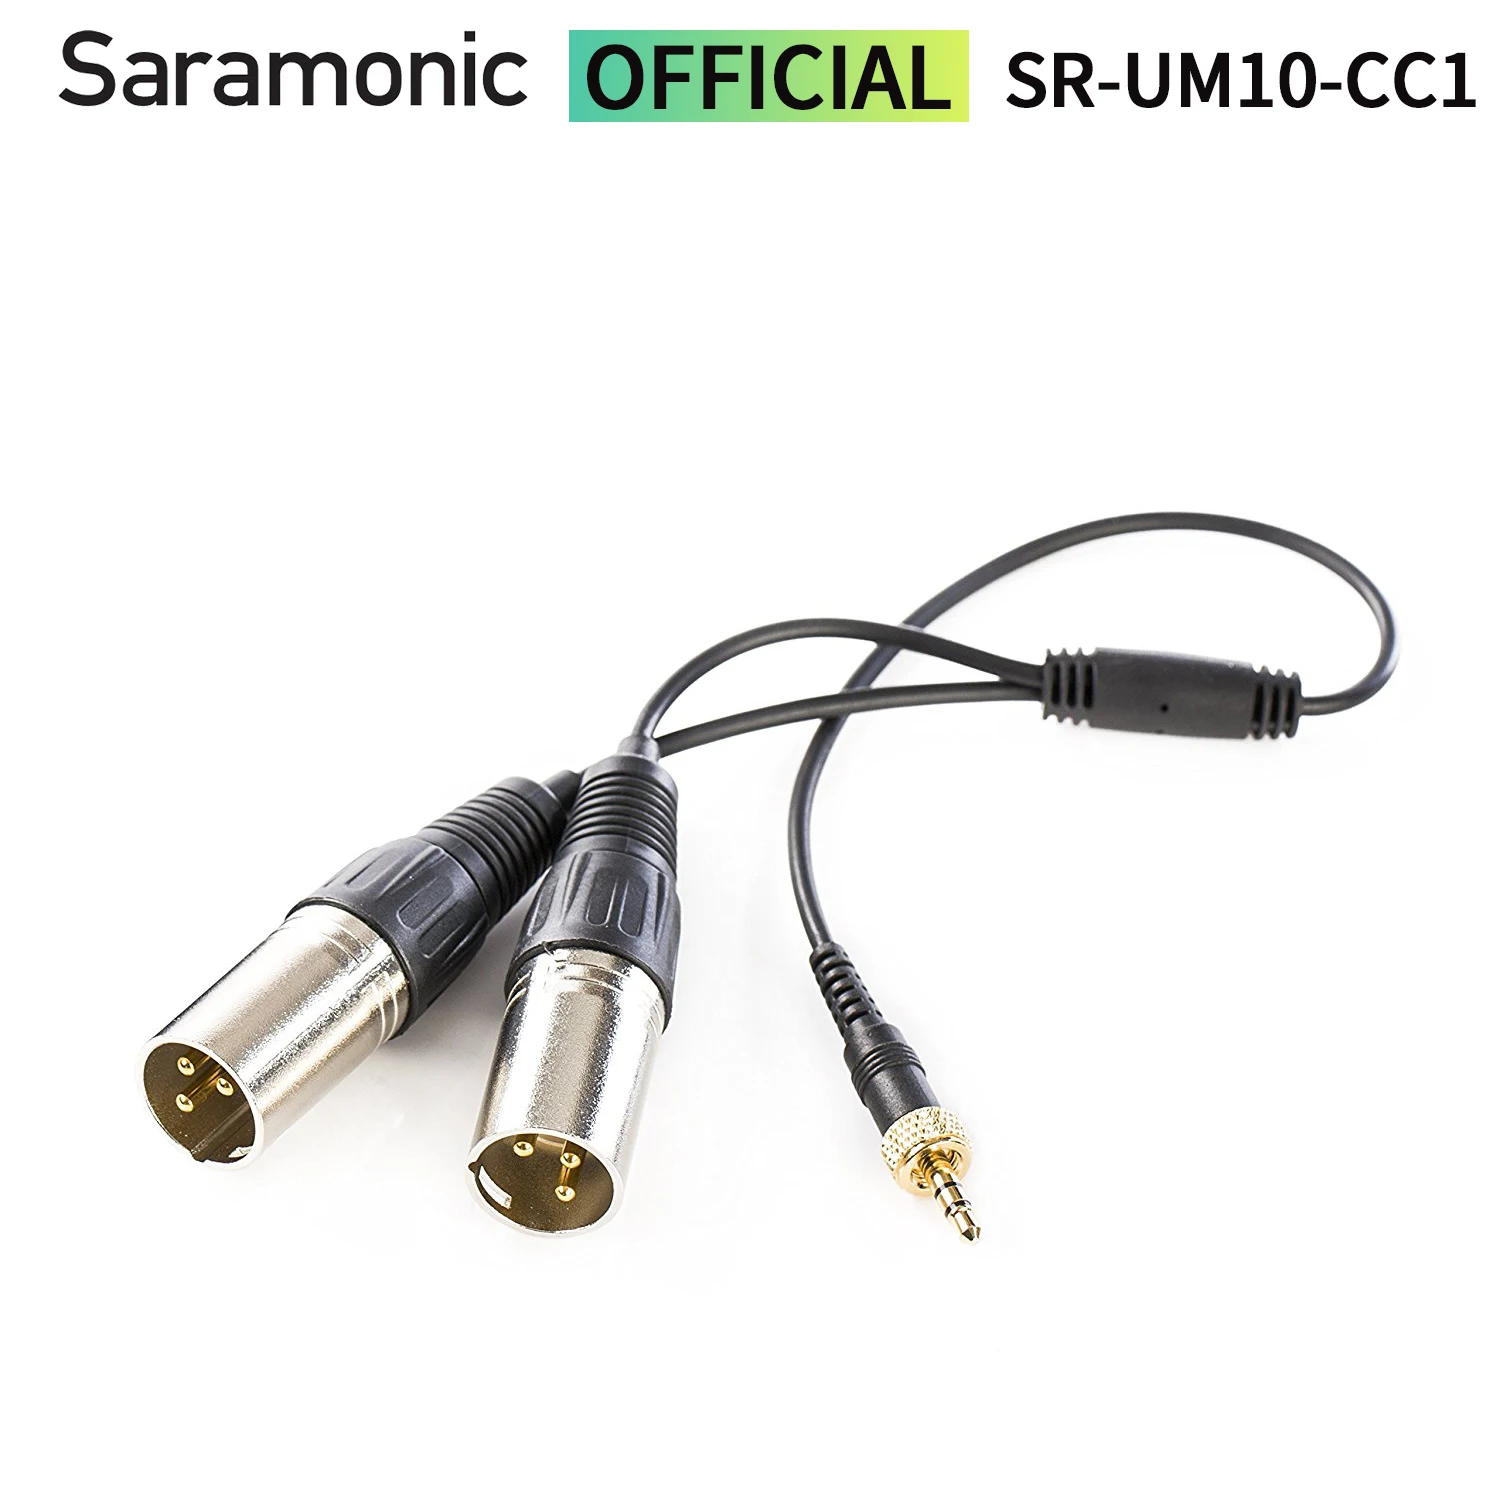 

Saramonic SR-UM10-CC1 Male 3.5mm TRS Locking Thread connector to Dual 3-pin XLR Audio Adapter Cable for Wireless Microphone